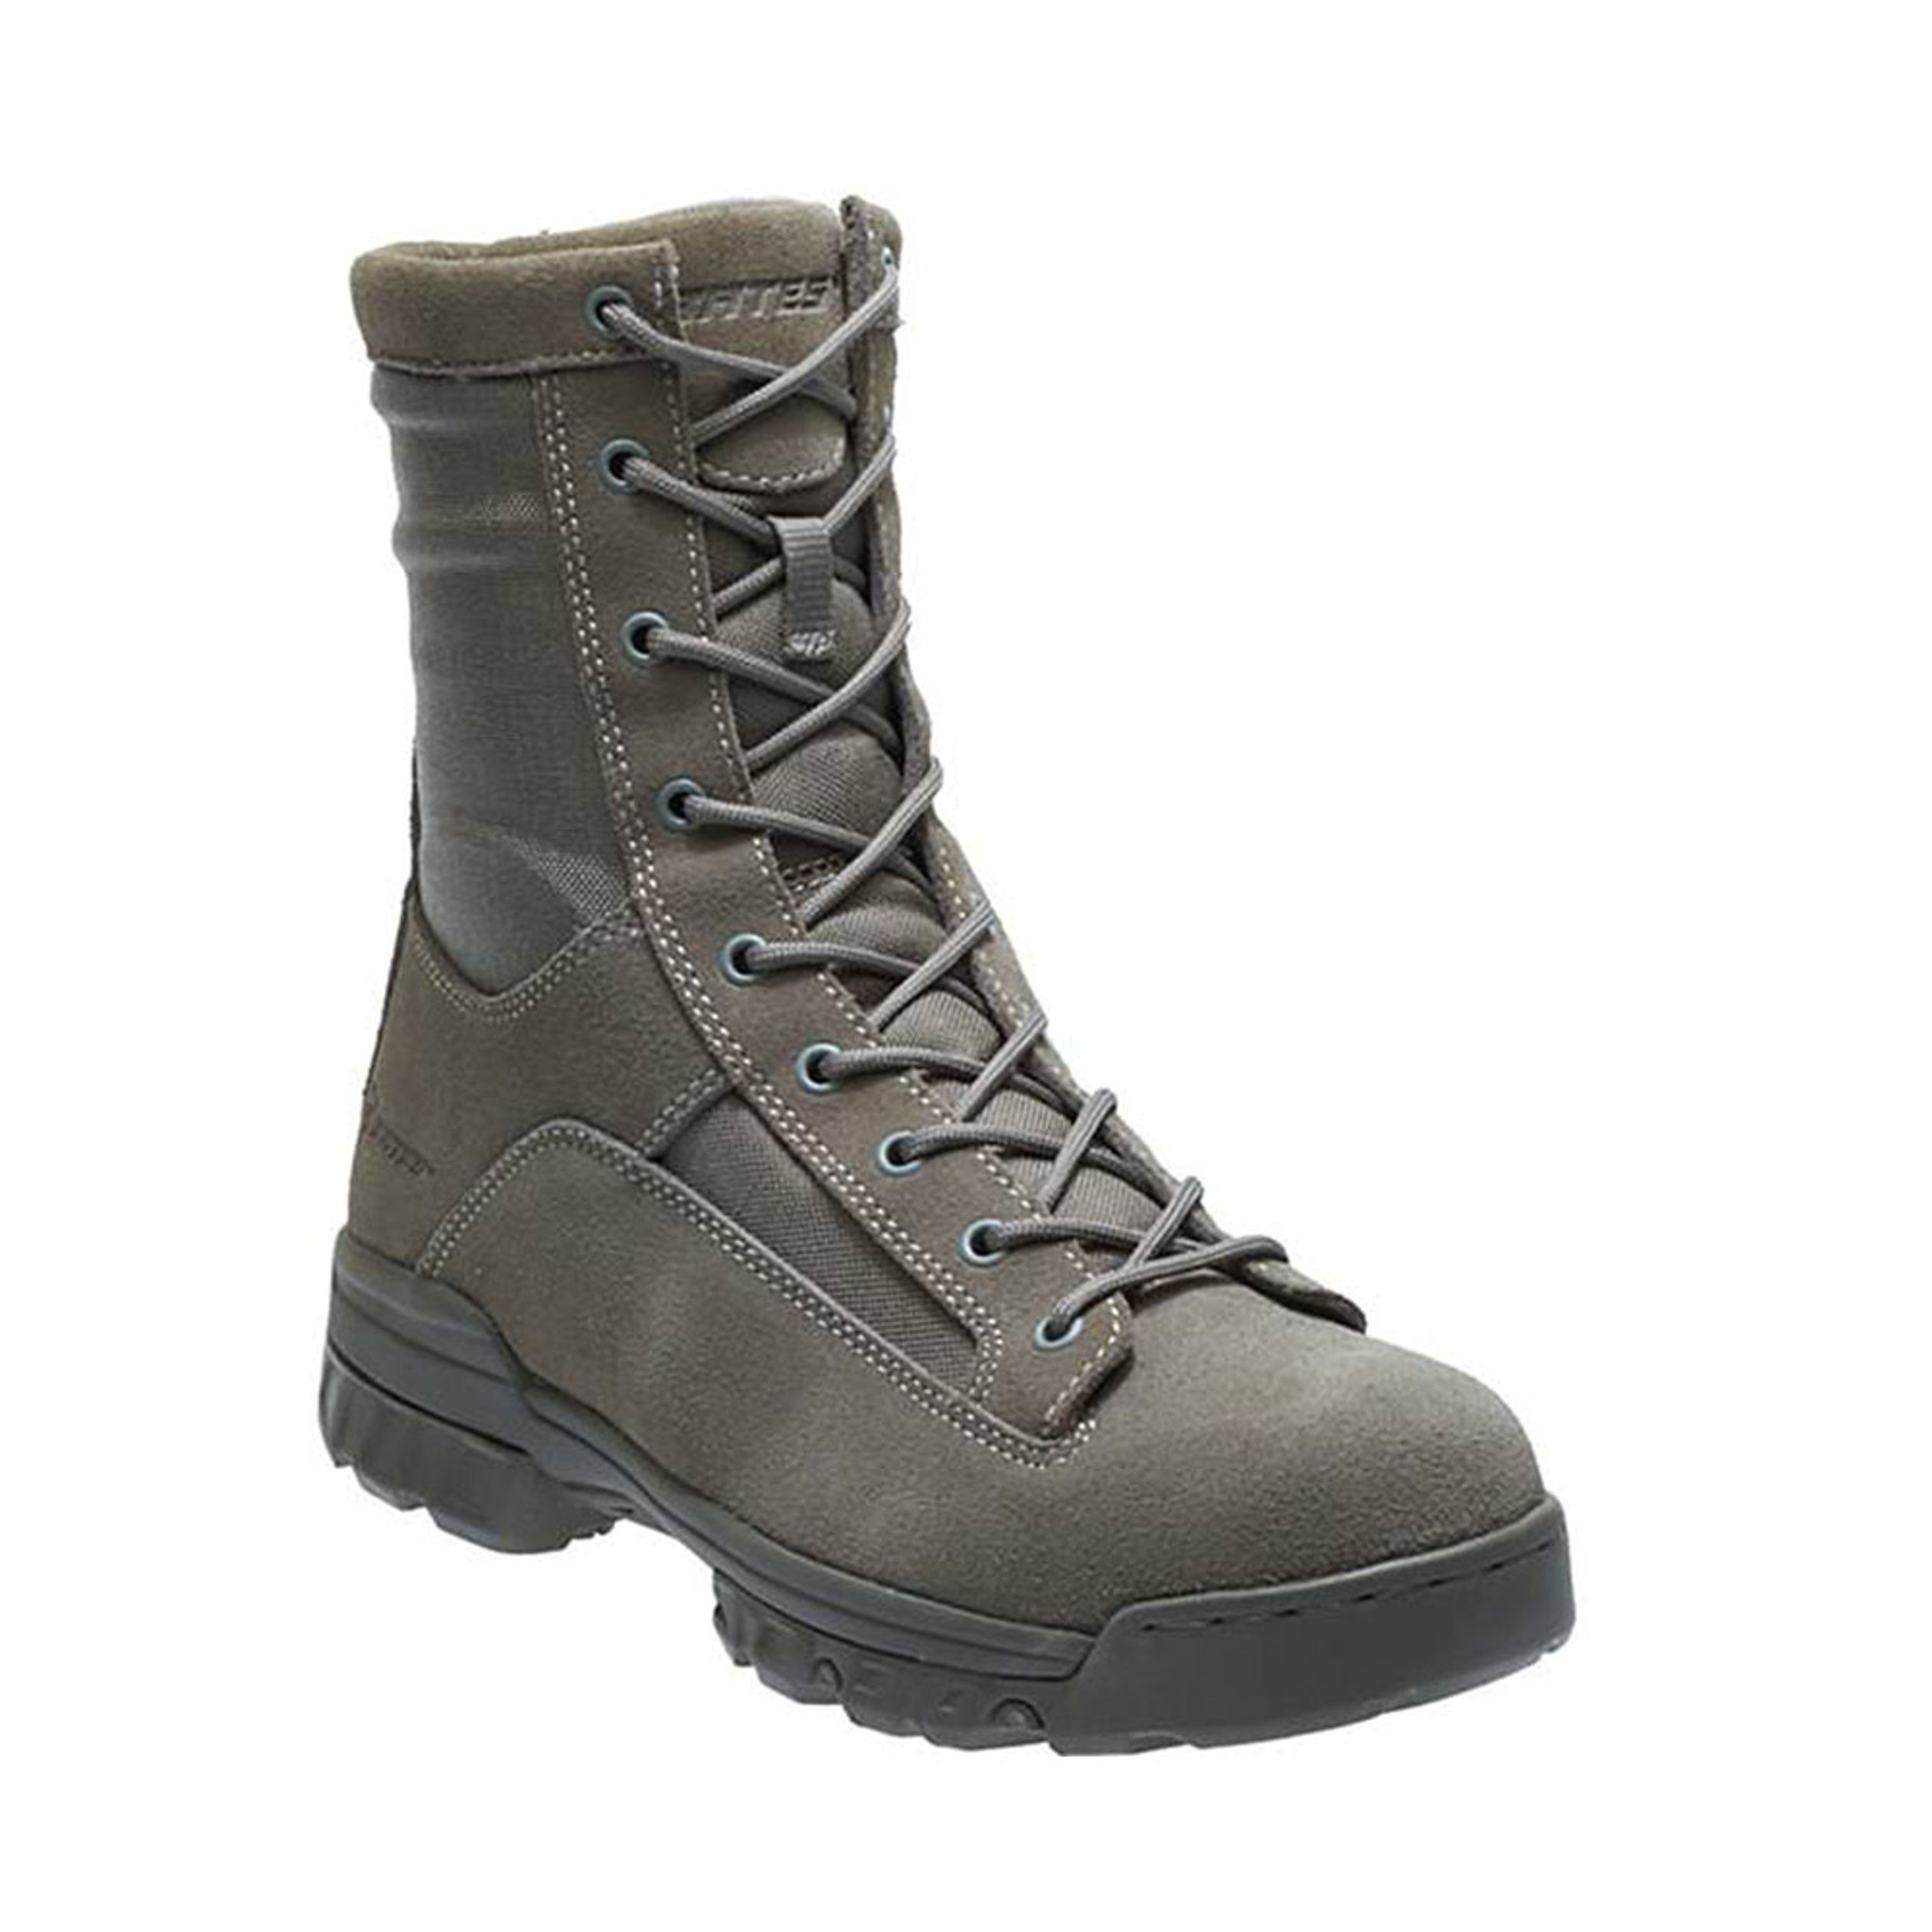 Bates E08695 Ranger II Hot Weather Military Outdoor Tactical Work Boots